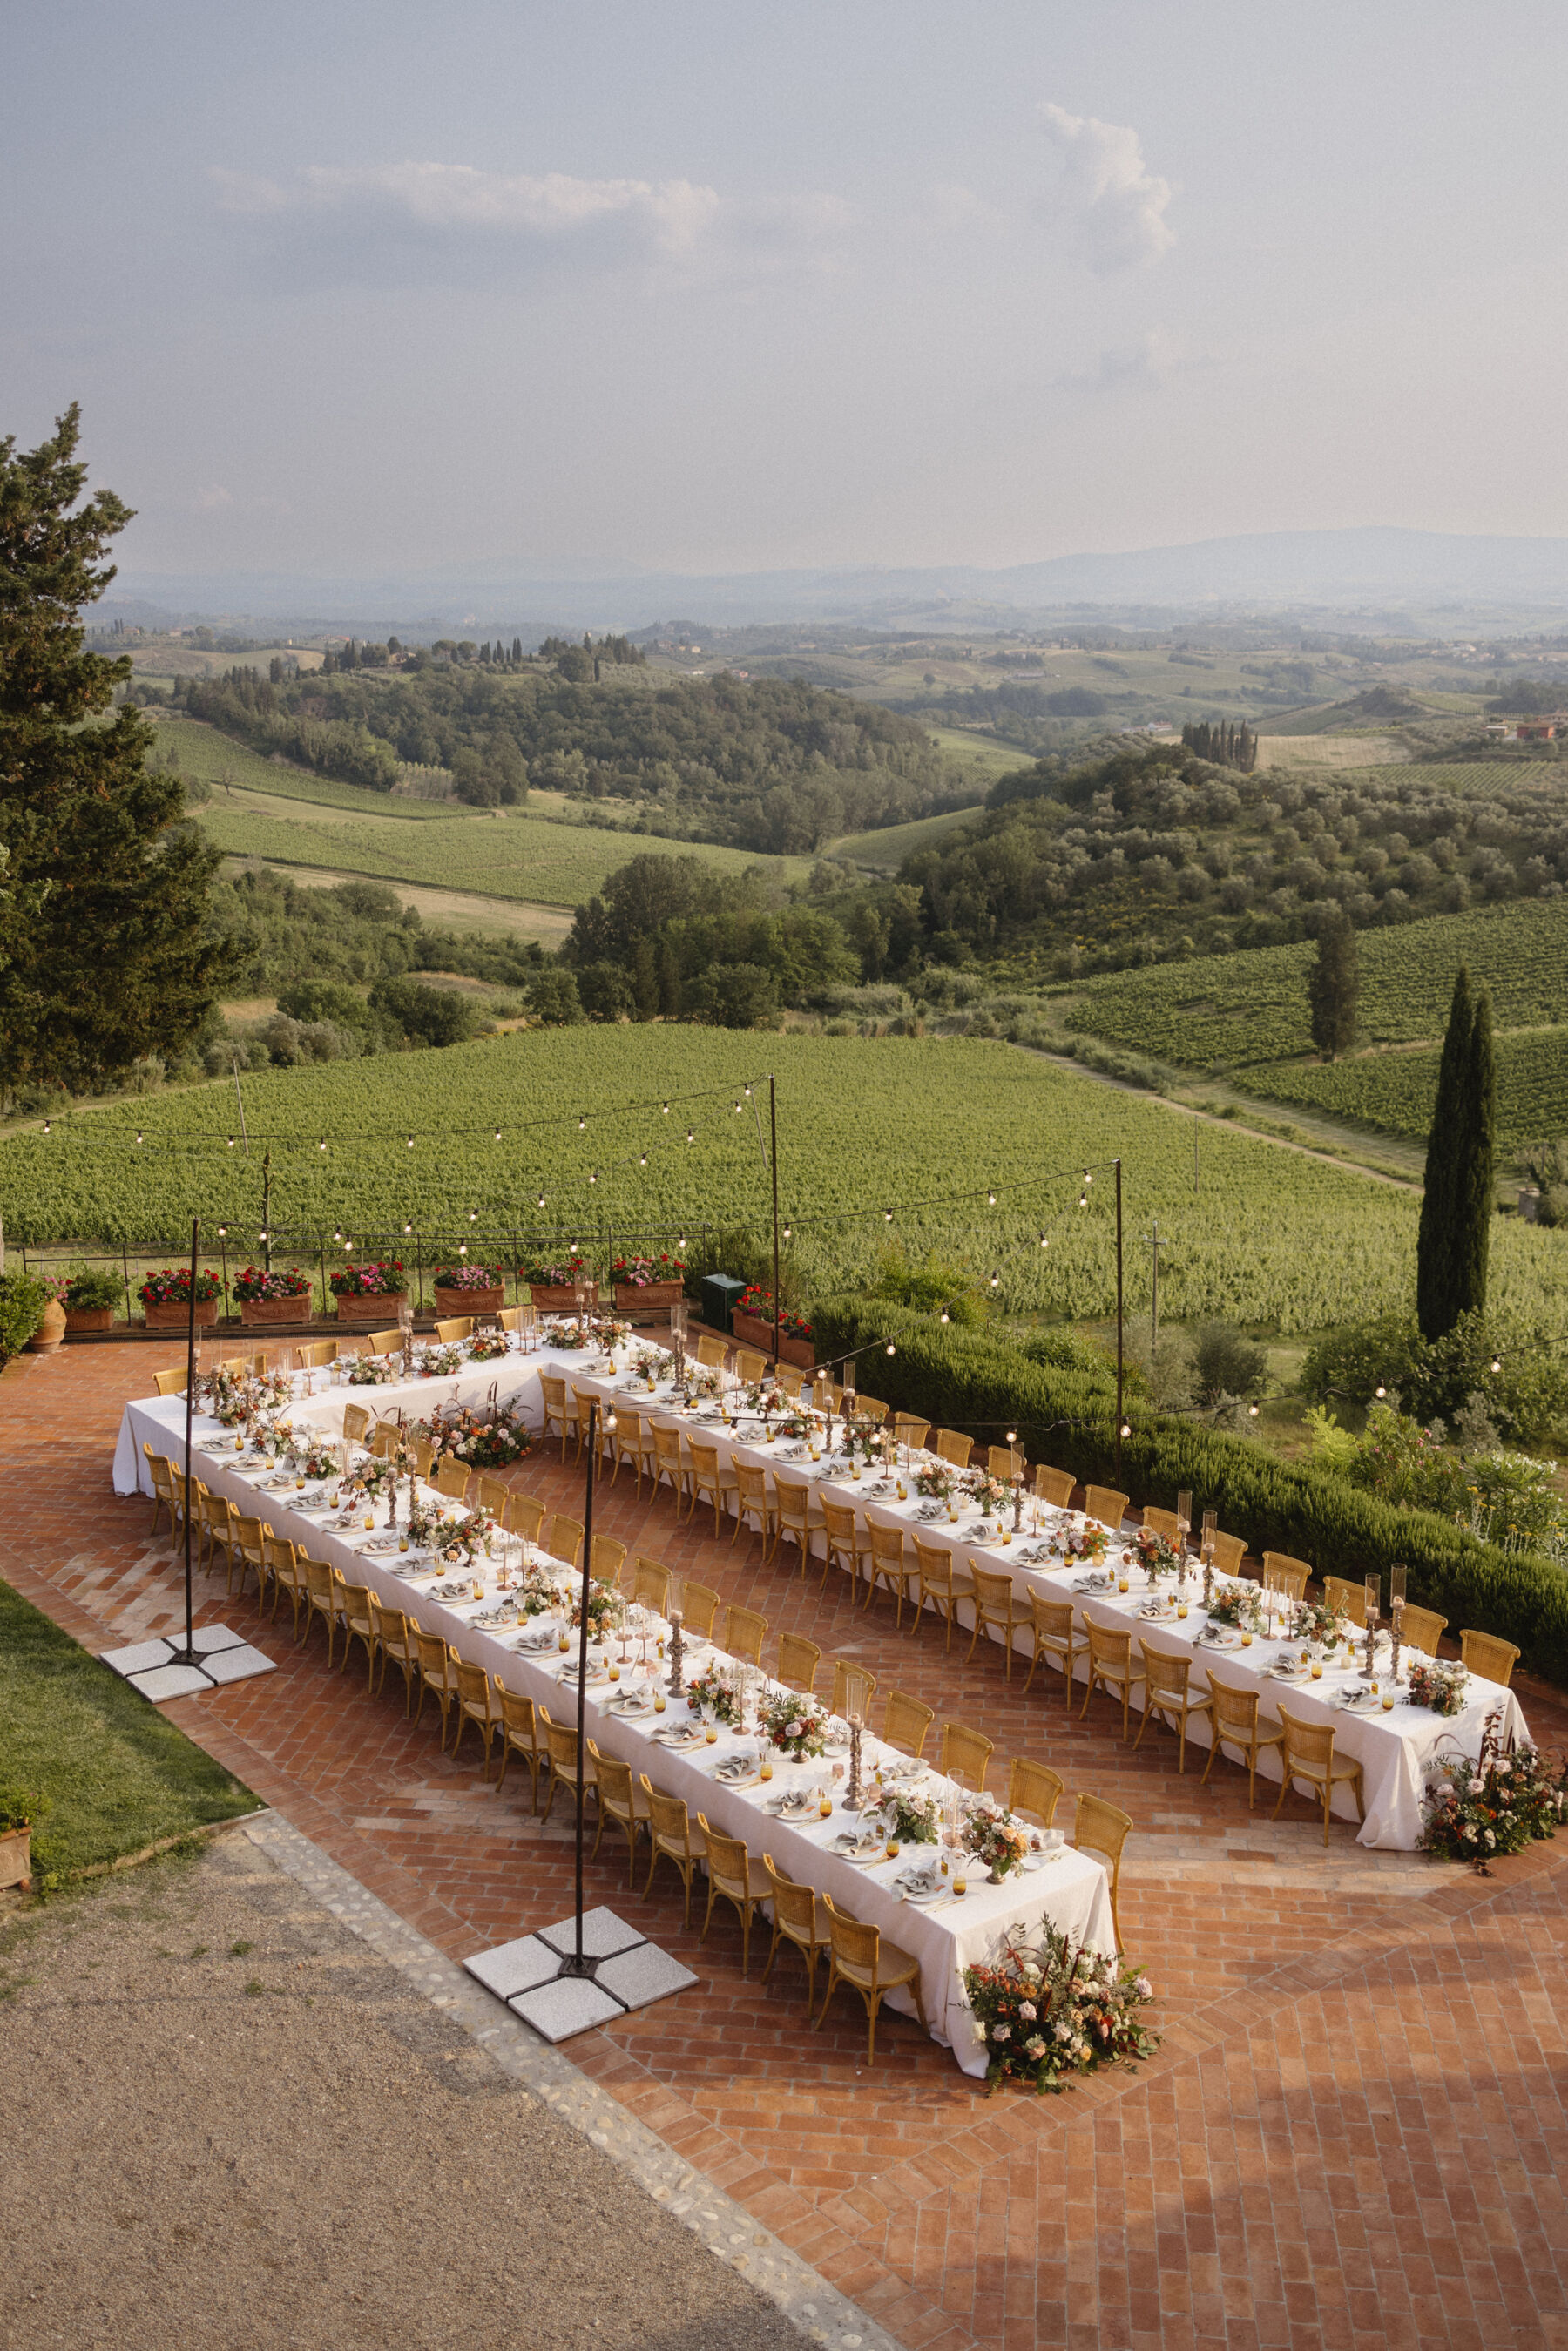 Long dining tables arrange for an outdoor wedding reception in Tuscany, Italy. Rolling hills captured in the backdrop.